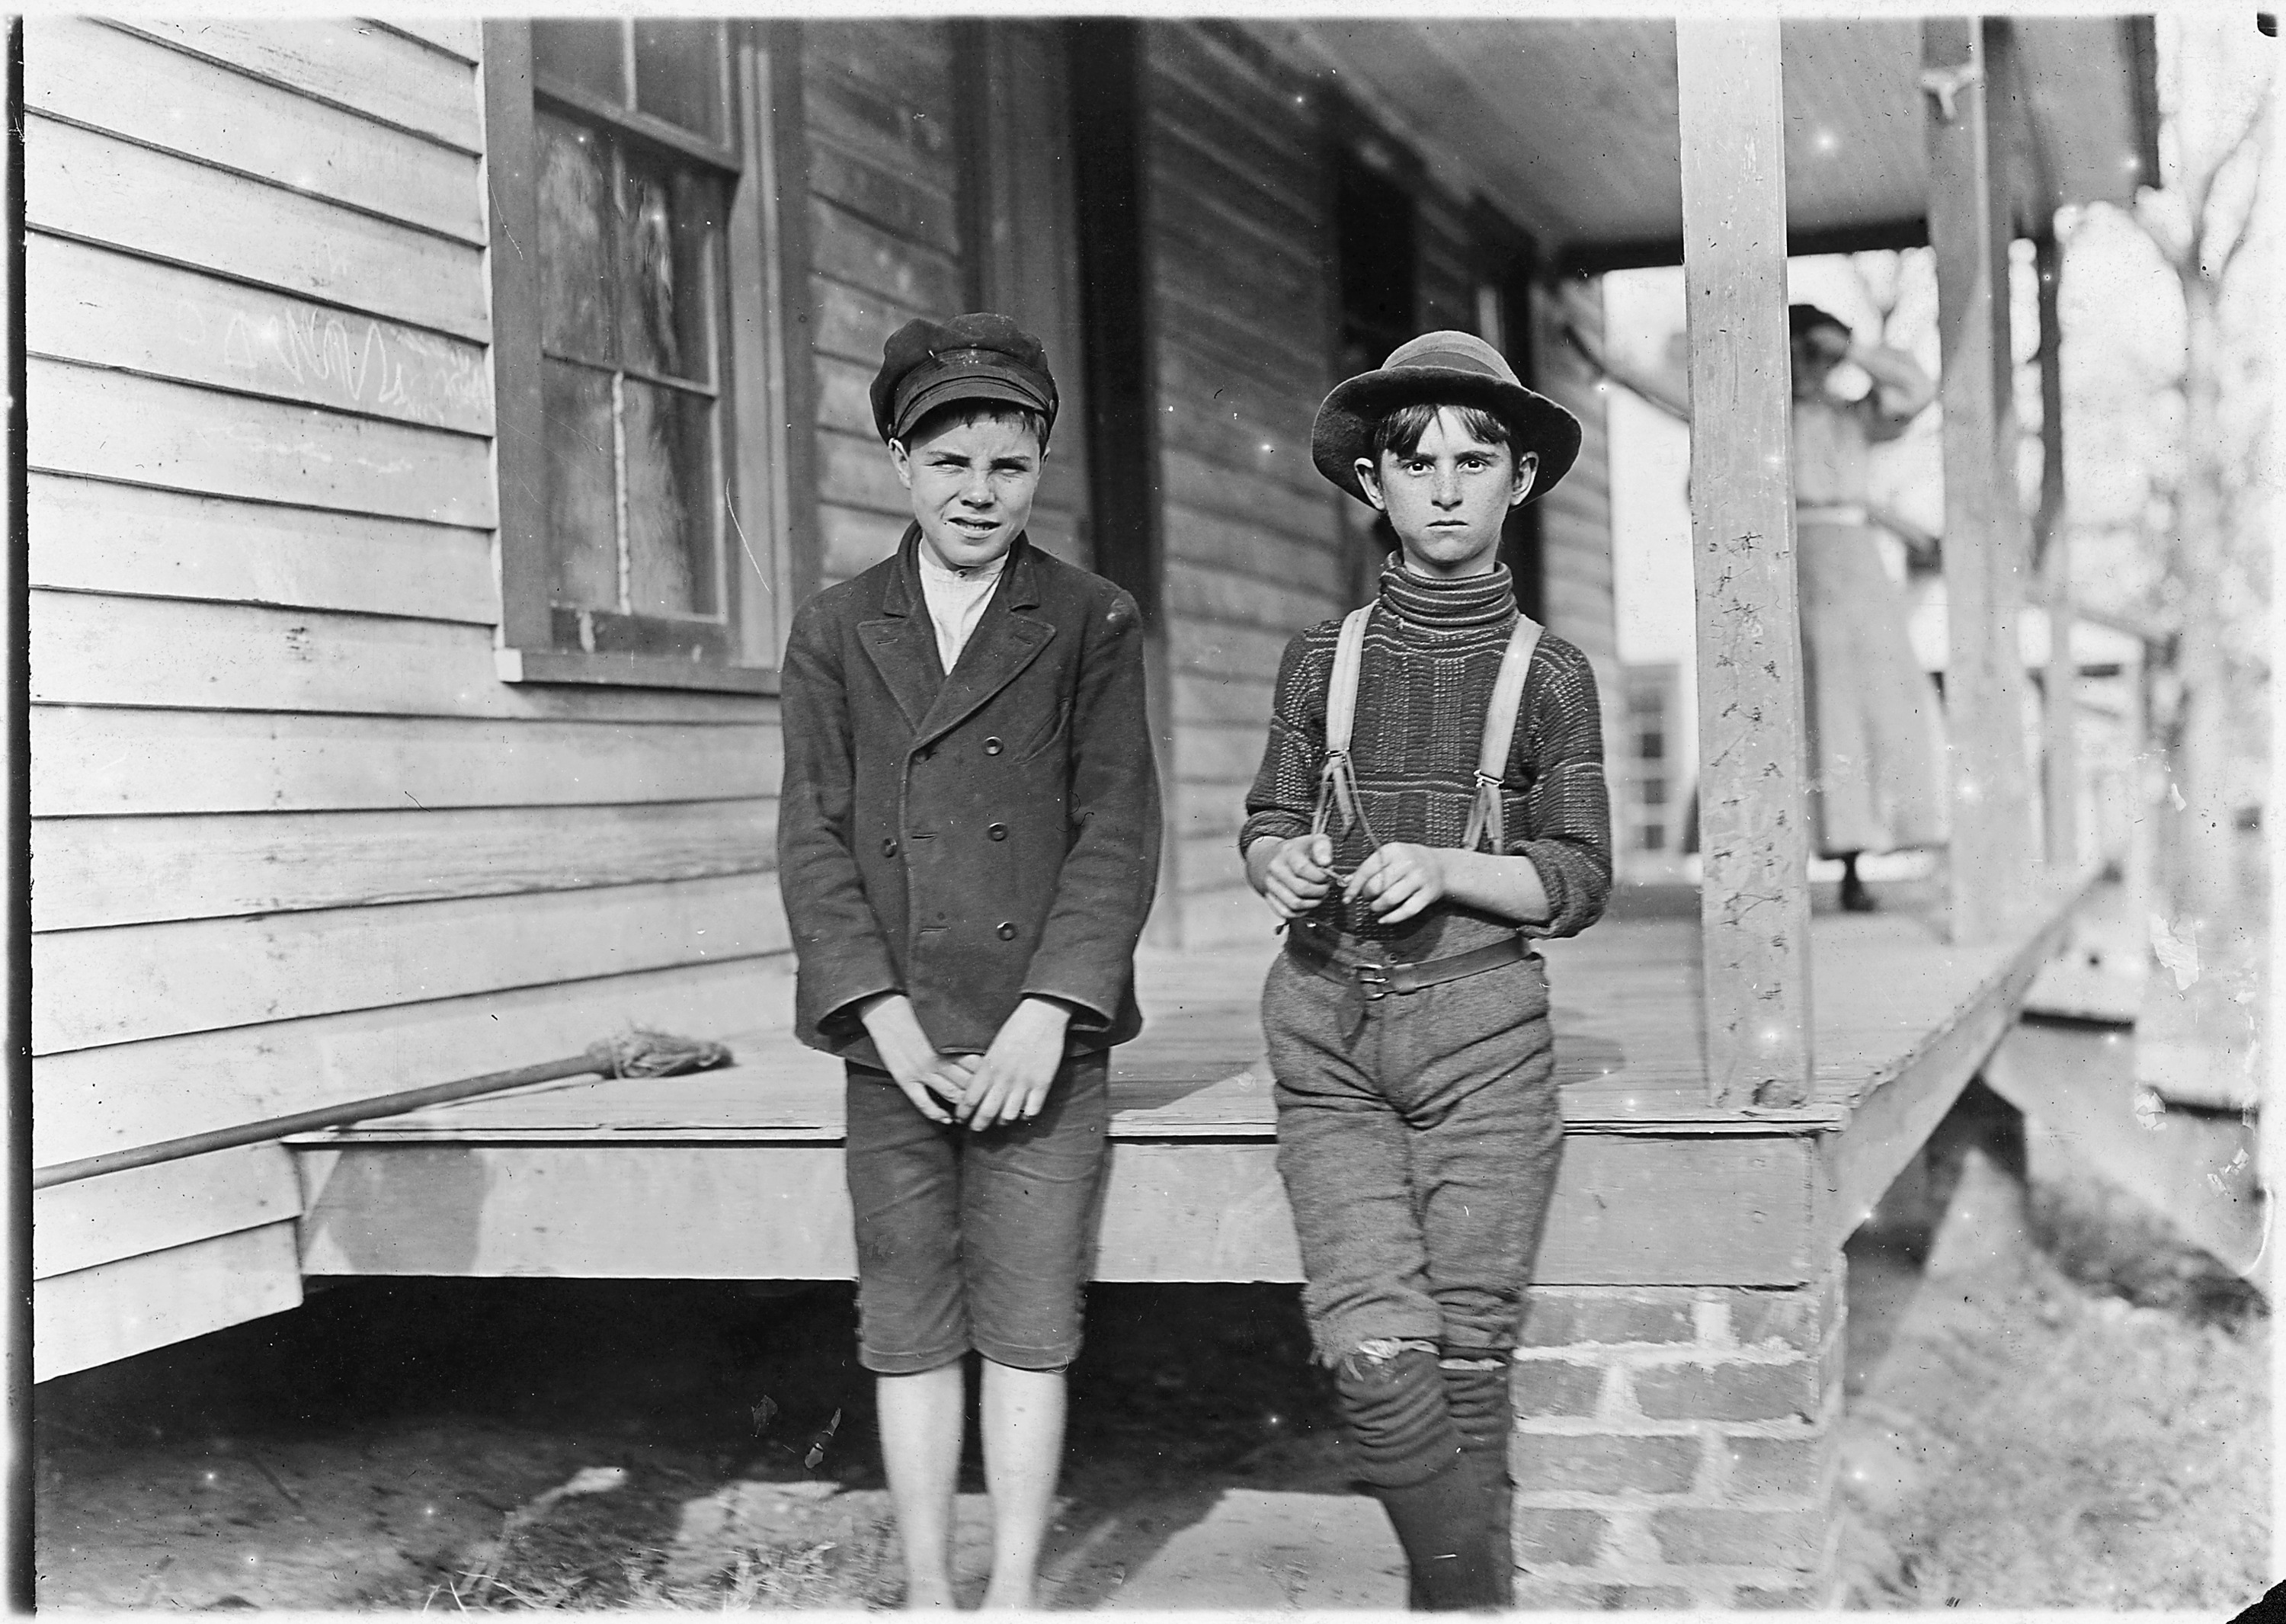 Springstein Mill. John Lewis (boy with hat), 12 years old, 1 year in mill. Weaver - 4 looms. 40 (cents) a day to... - NARA - 523117